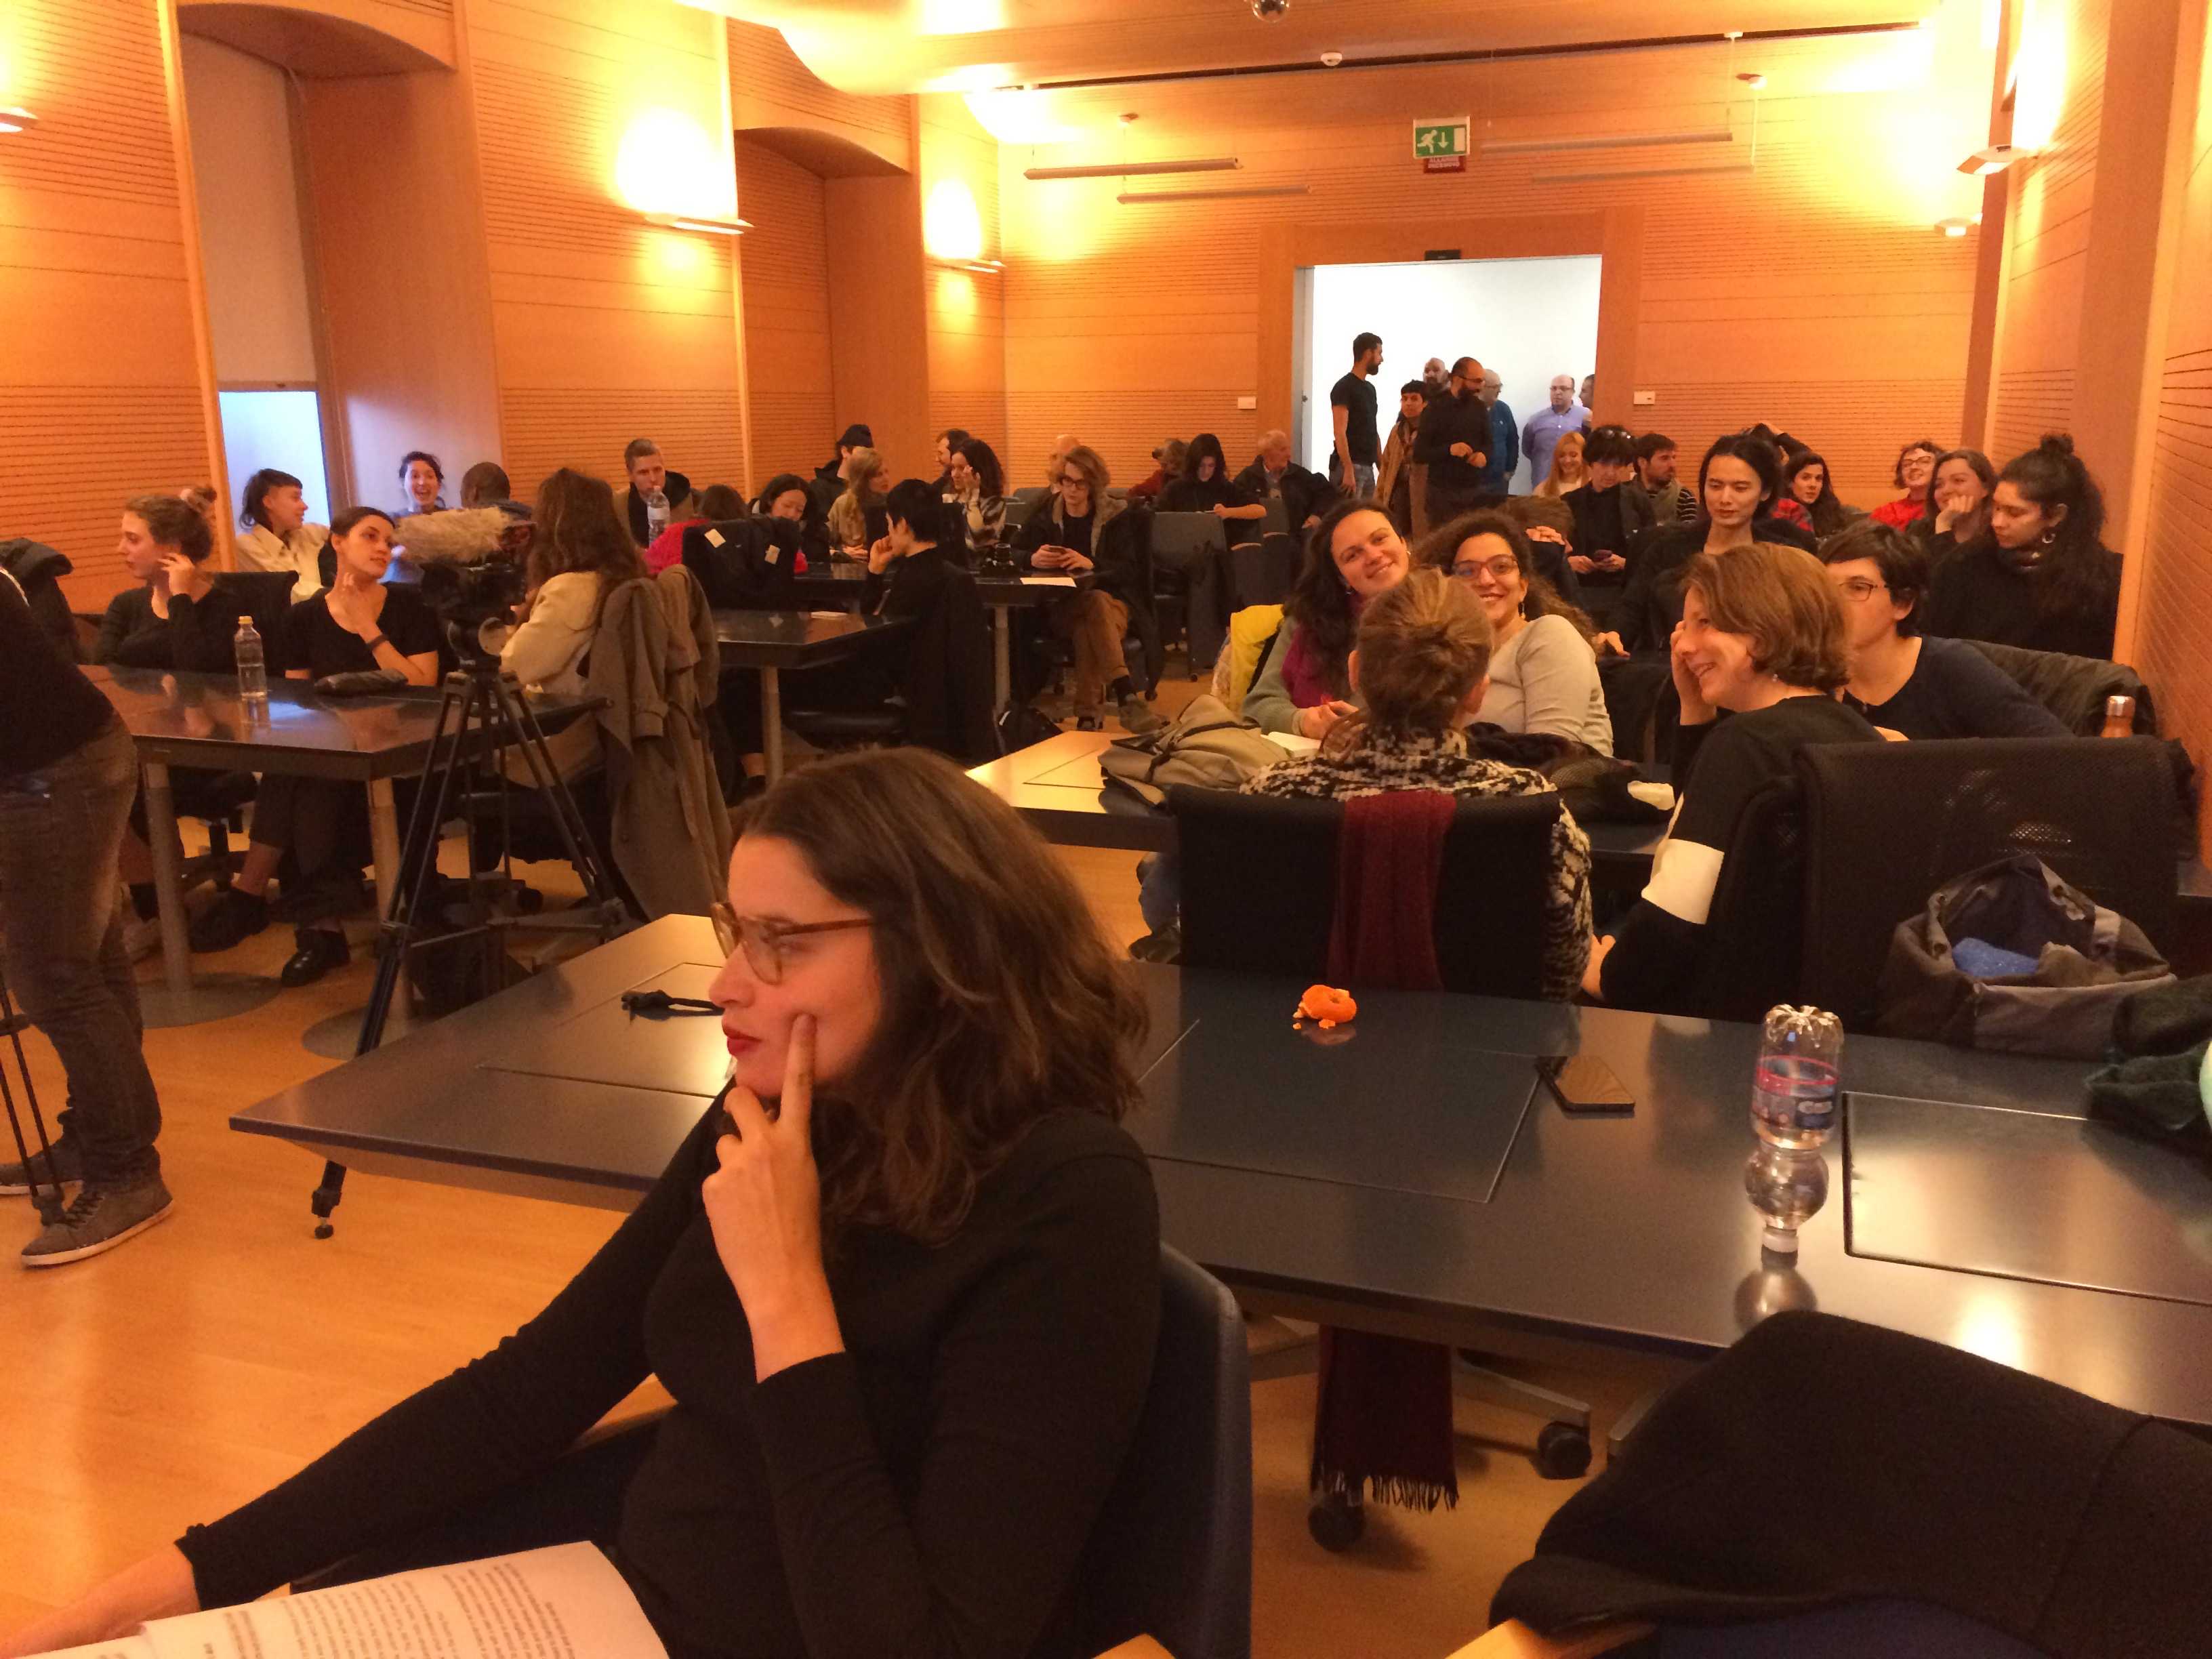 Audience at Luca Carboni's presentation for DAI at Sardinia's State Archive in Cagliari. January 2018. Photo: Gabriëlle Schleijpen.